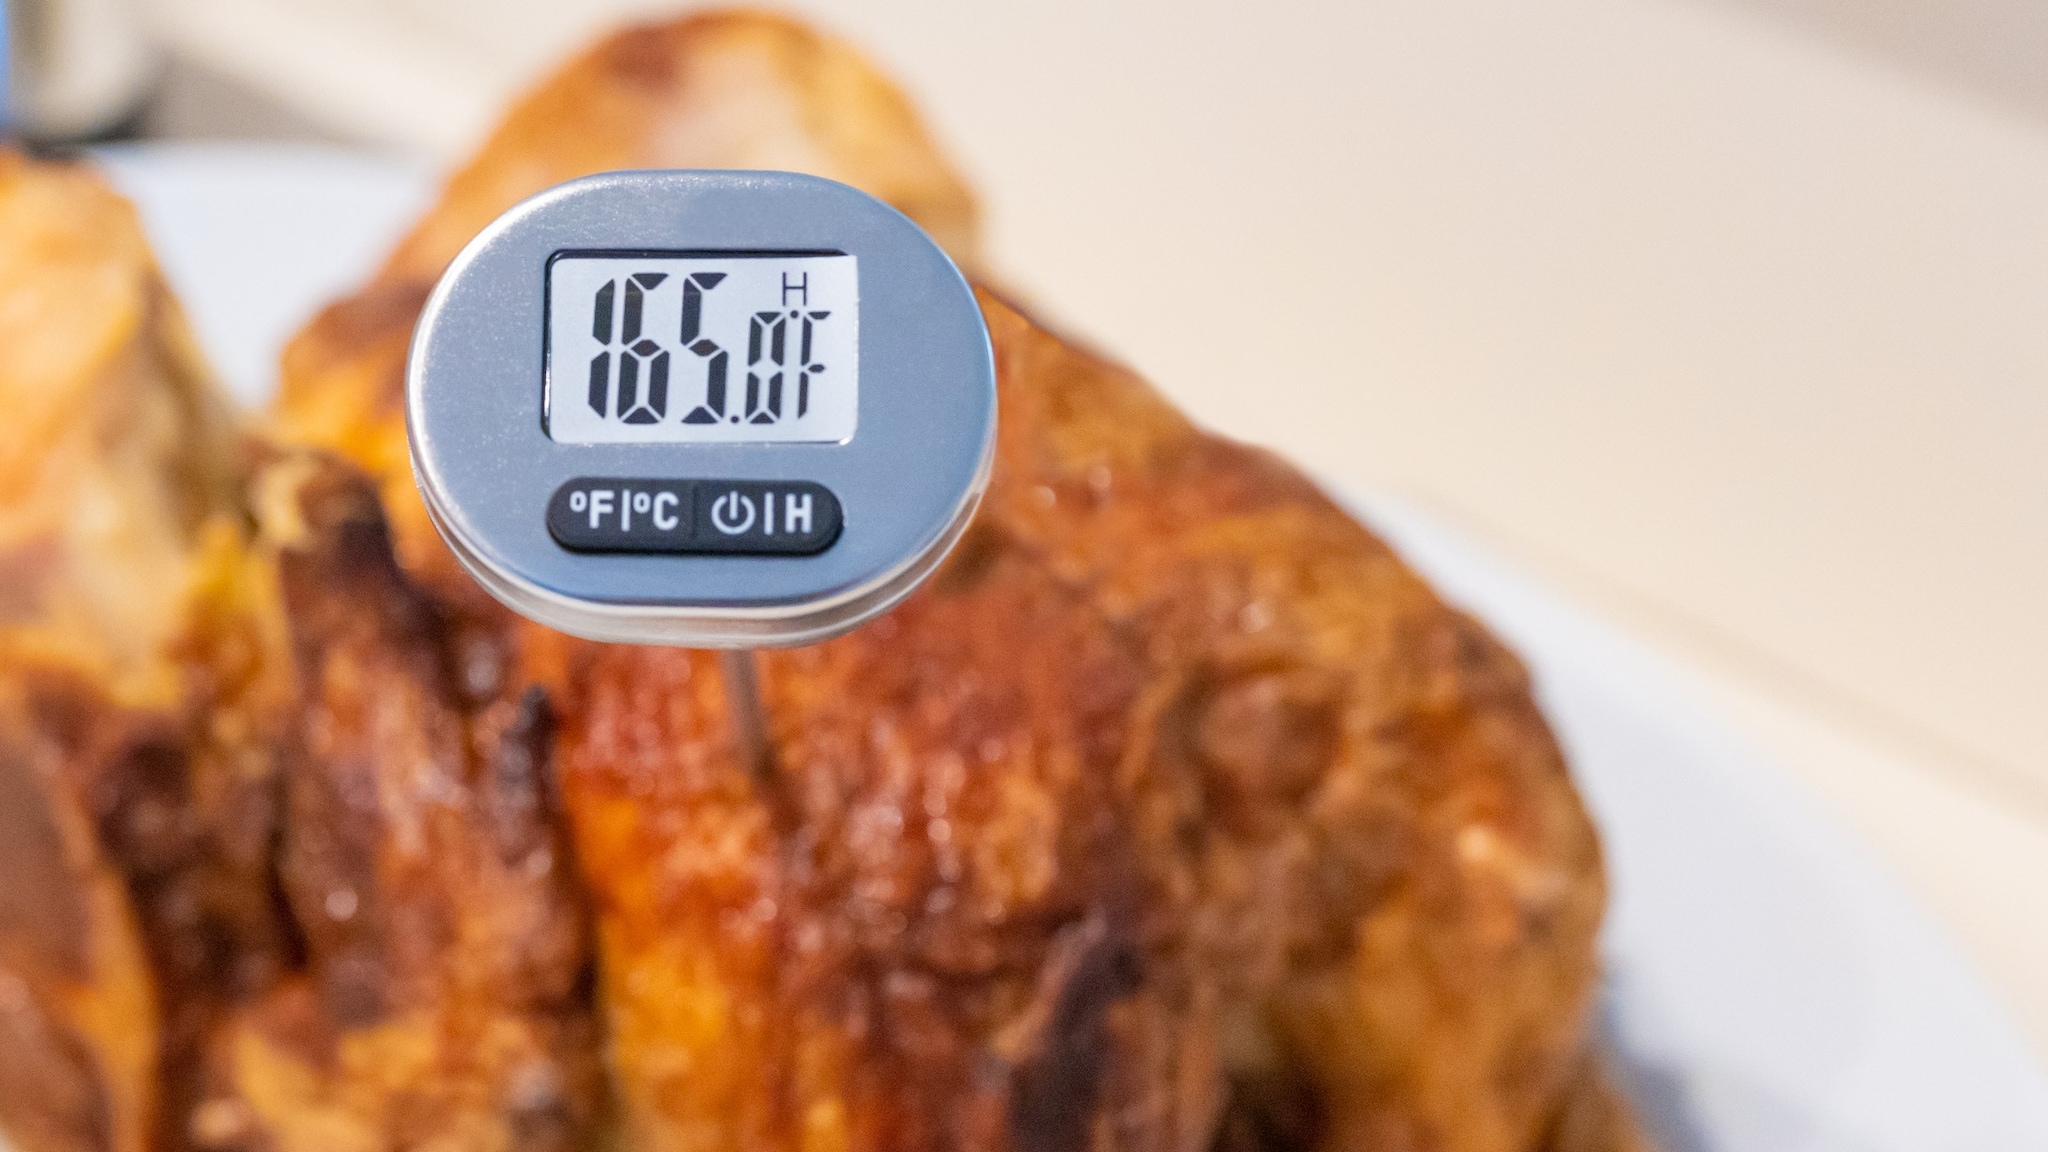 Rotisserie chicken with food thermometer showing the chicken has been cooked to a safe internal temperature of 165 degrees Fahrenheit.